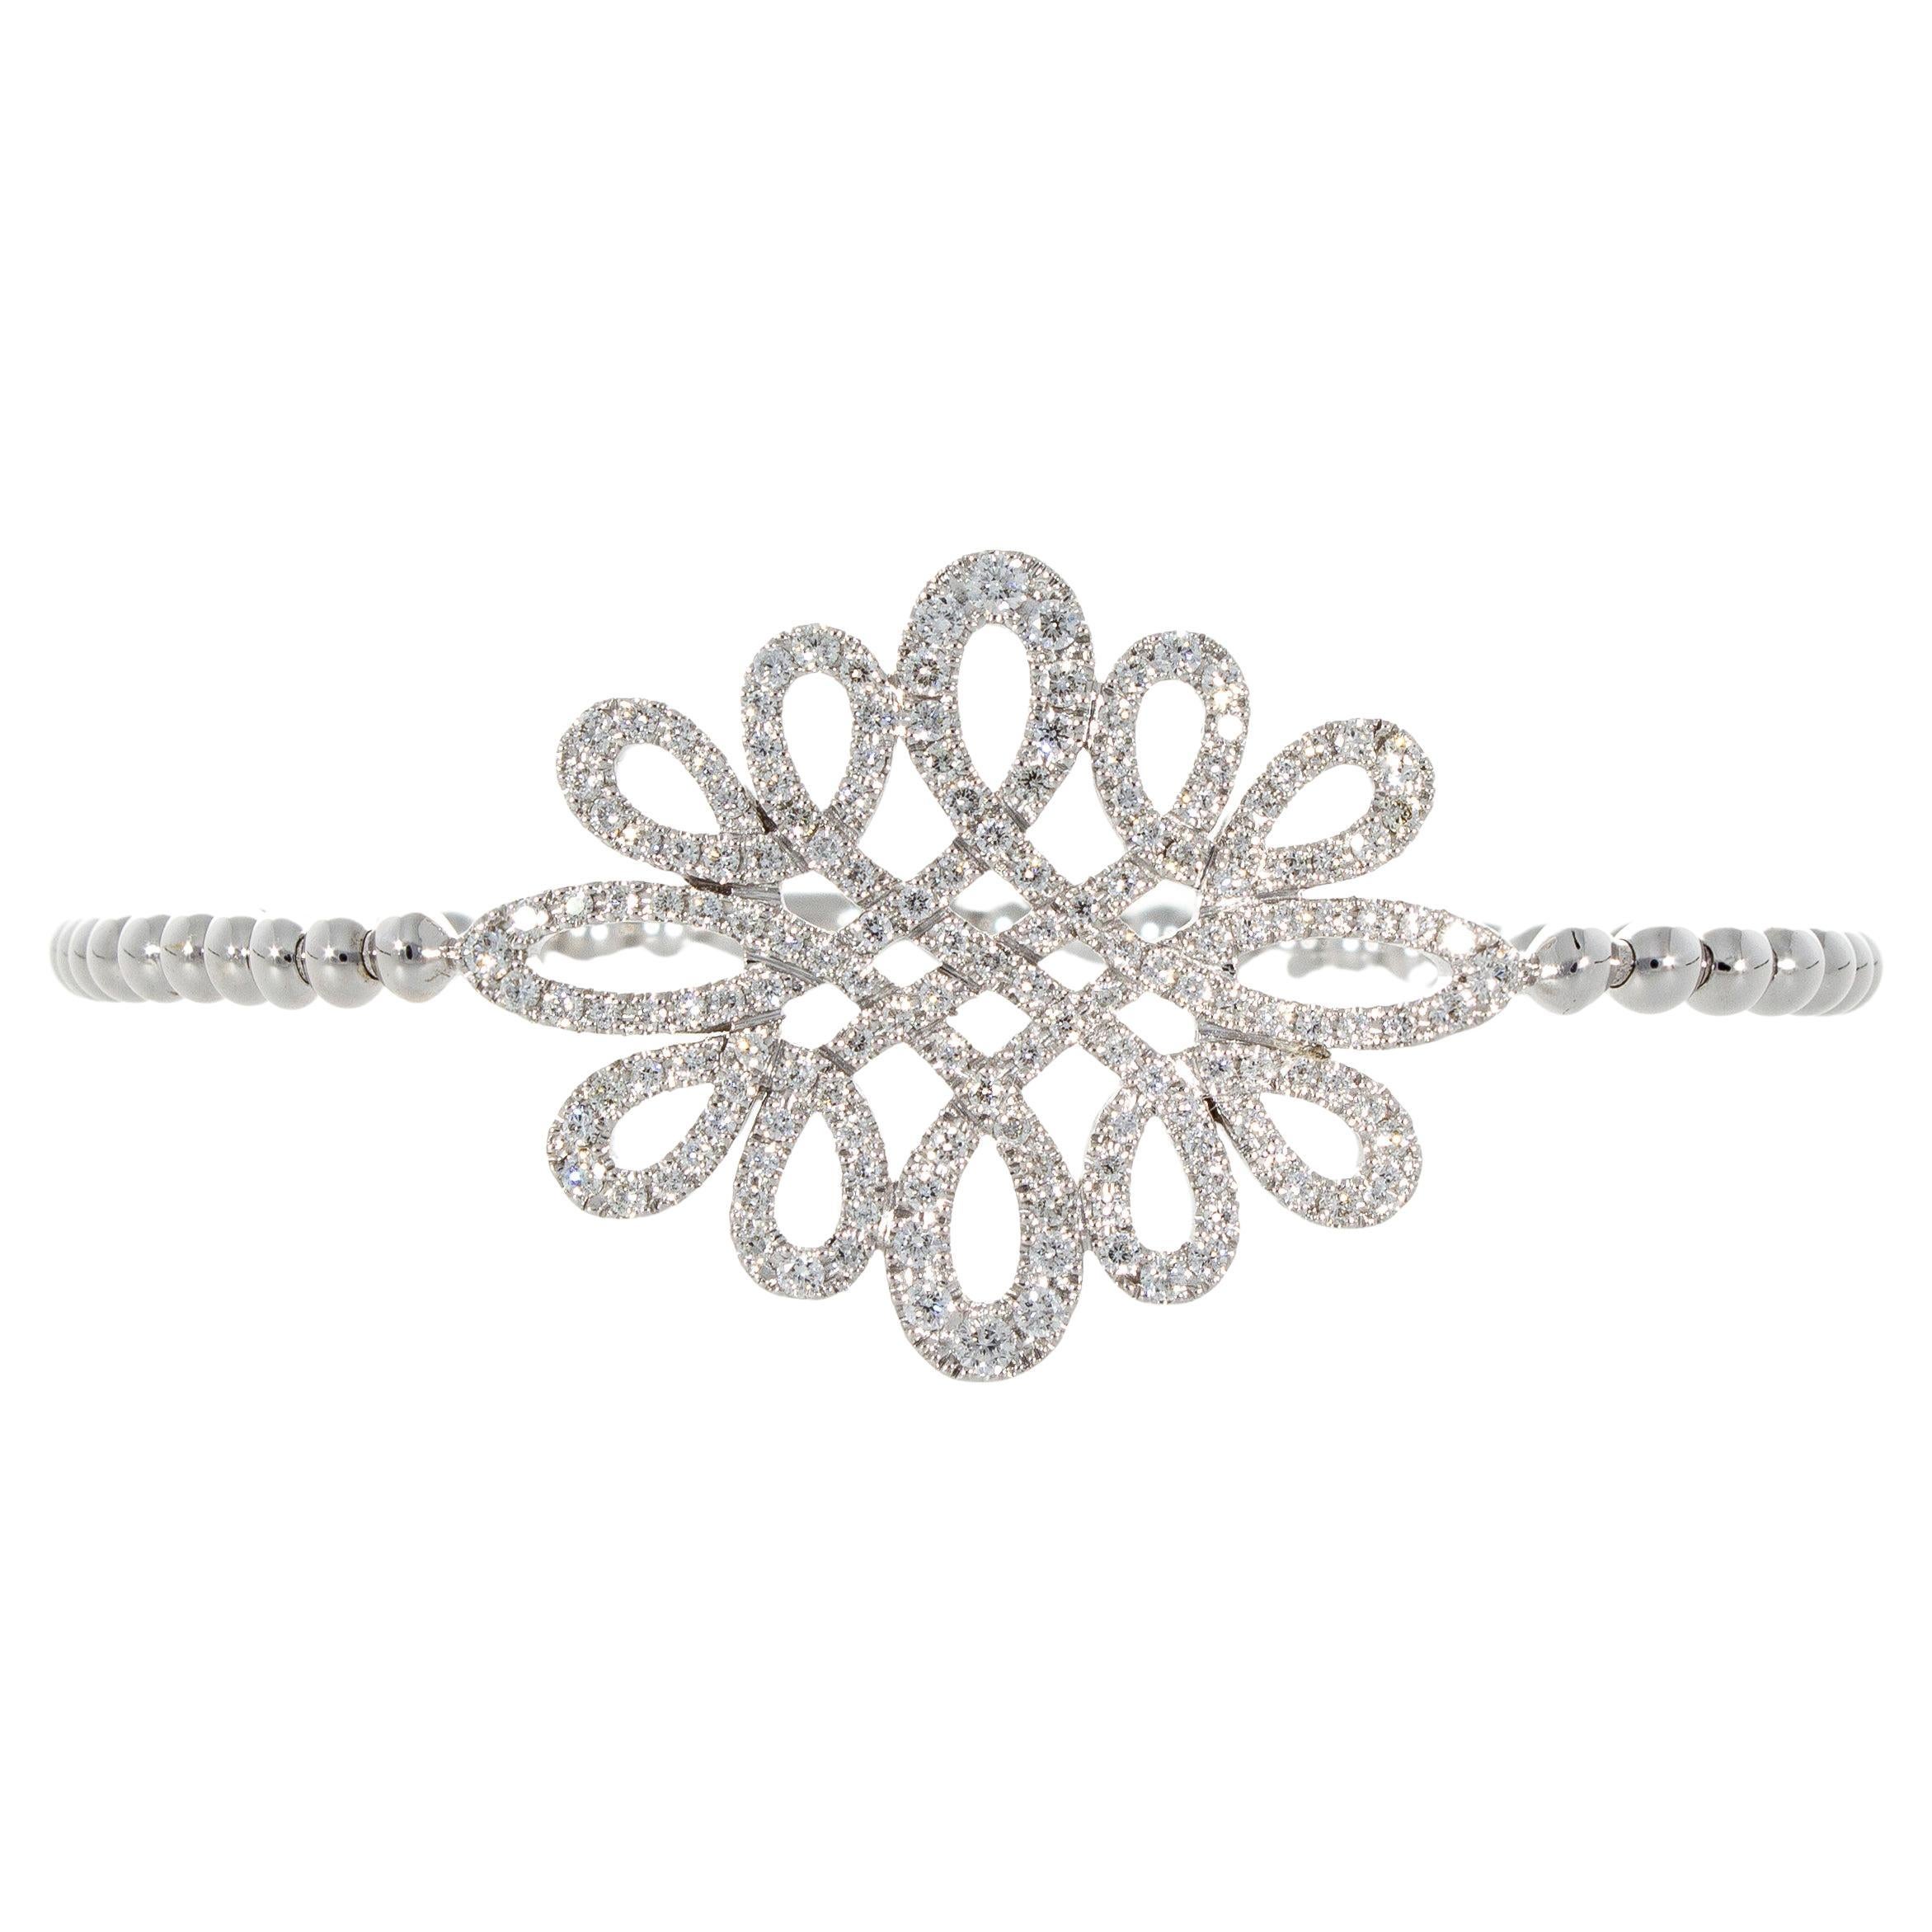 Diamonds Carat 1.04, Bracelet with Central Design, 18 Karat Gold, Made in Italy For Sale